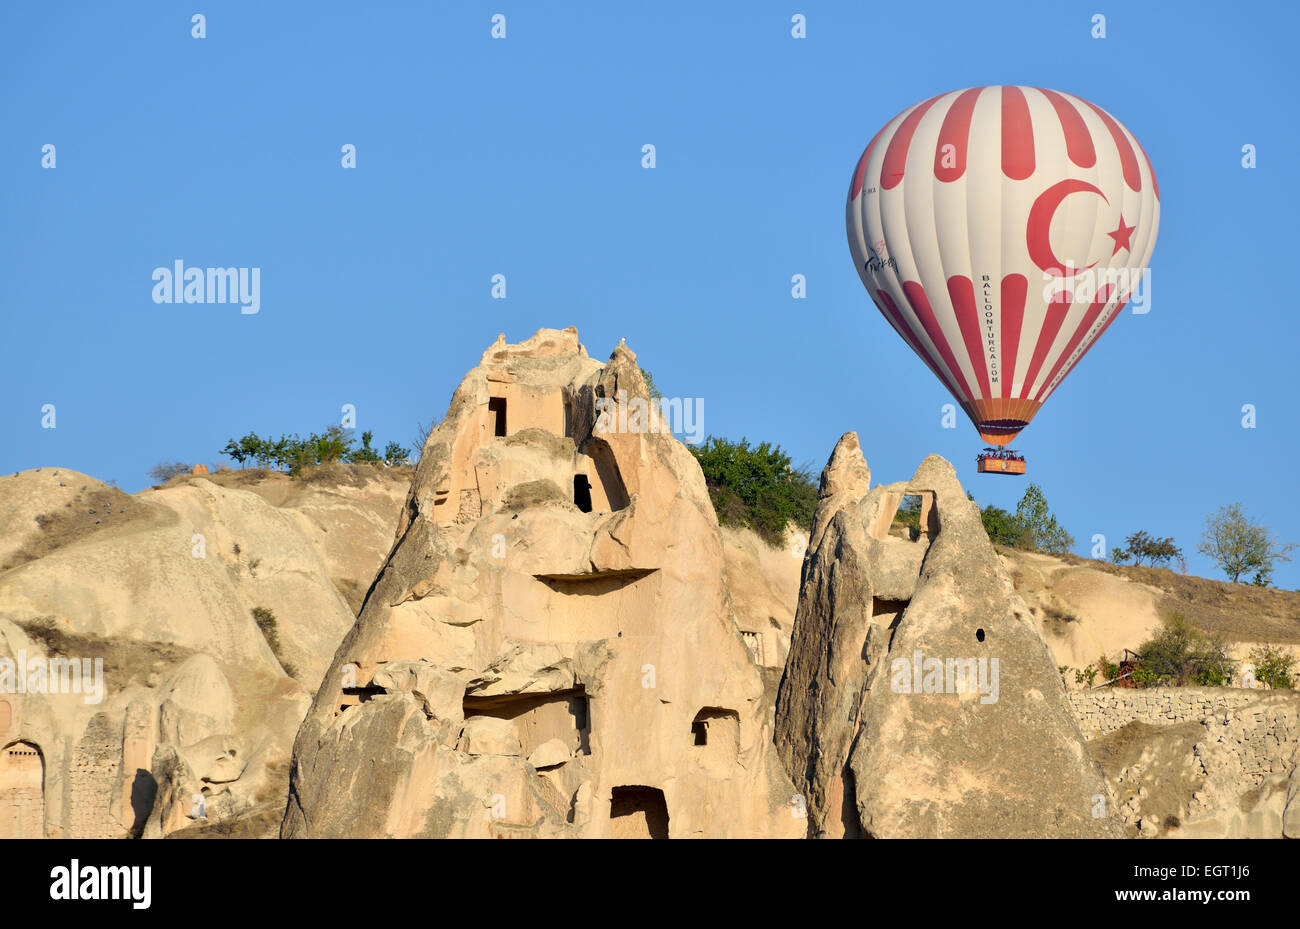 Hot air balloon flying over tufa rock formations and ancient cave dwellings, Goreme, Cappadocia, Turkey Stock Photo